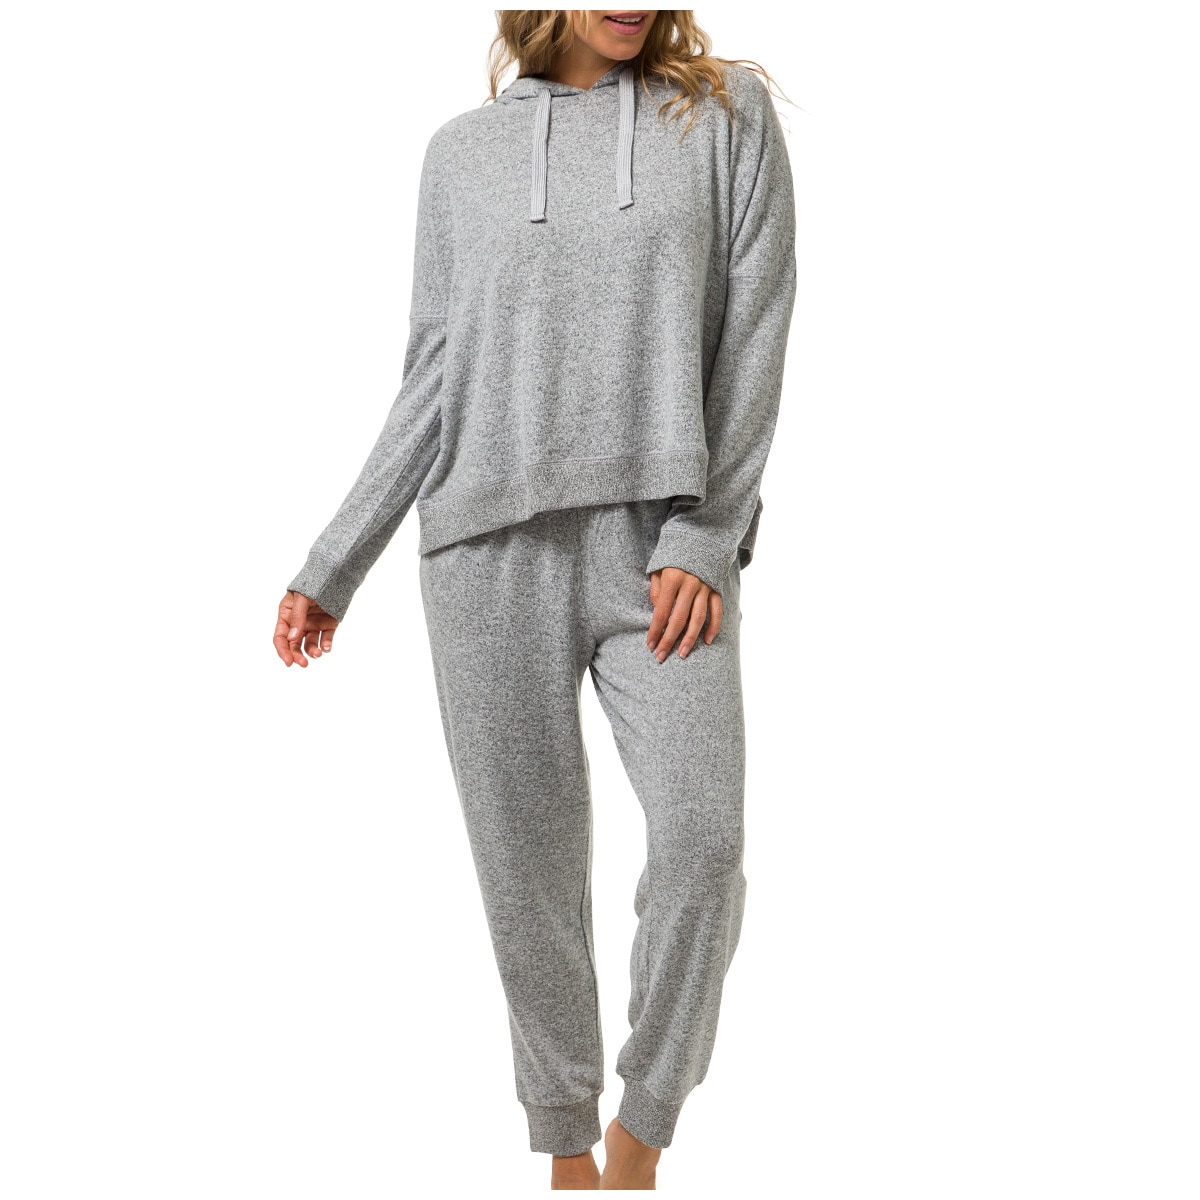 Advent 3 piece Supersoft Set - Mid Grey Marle